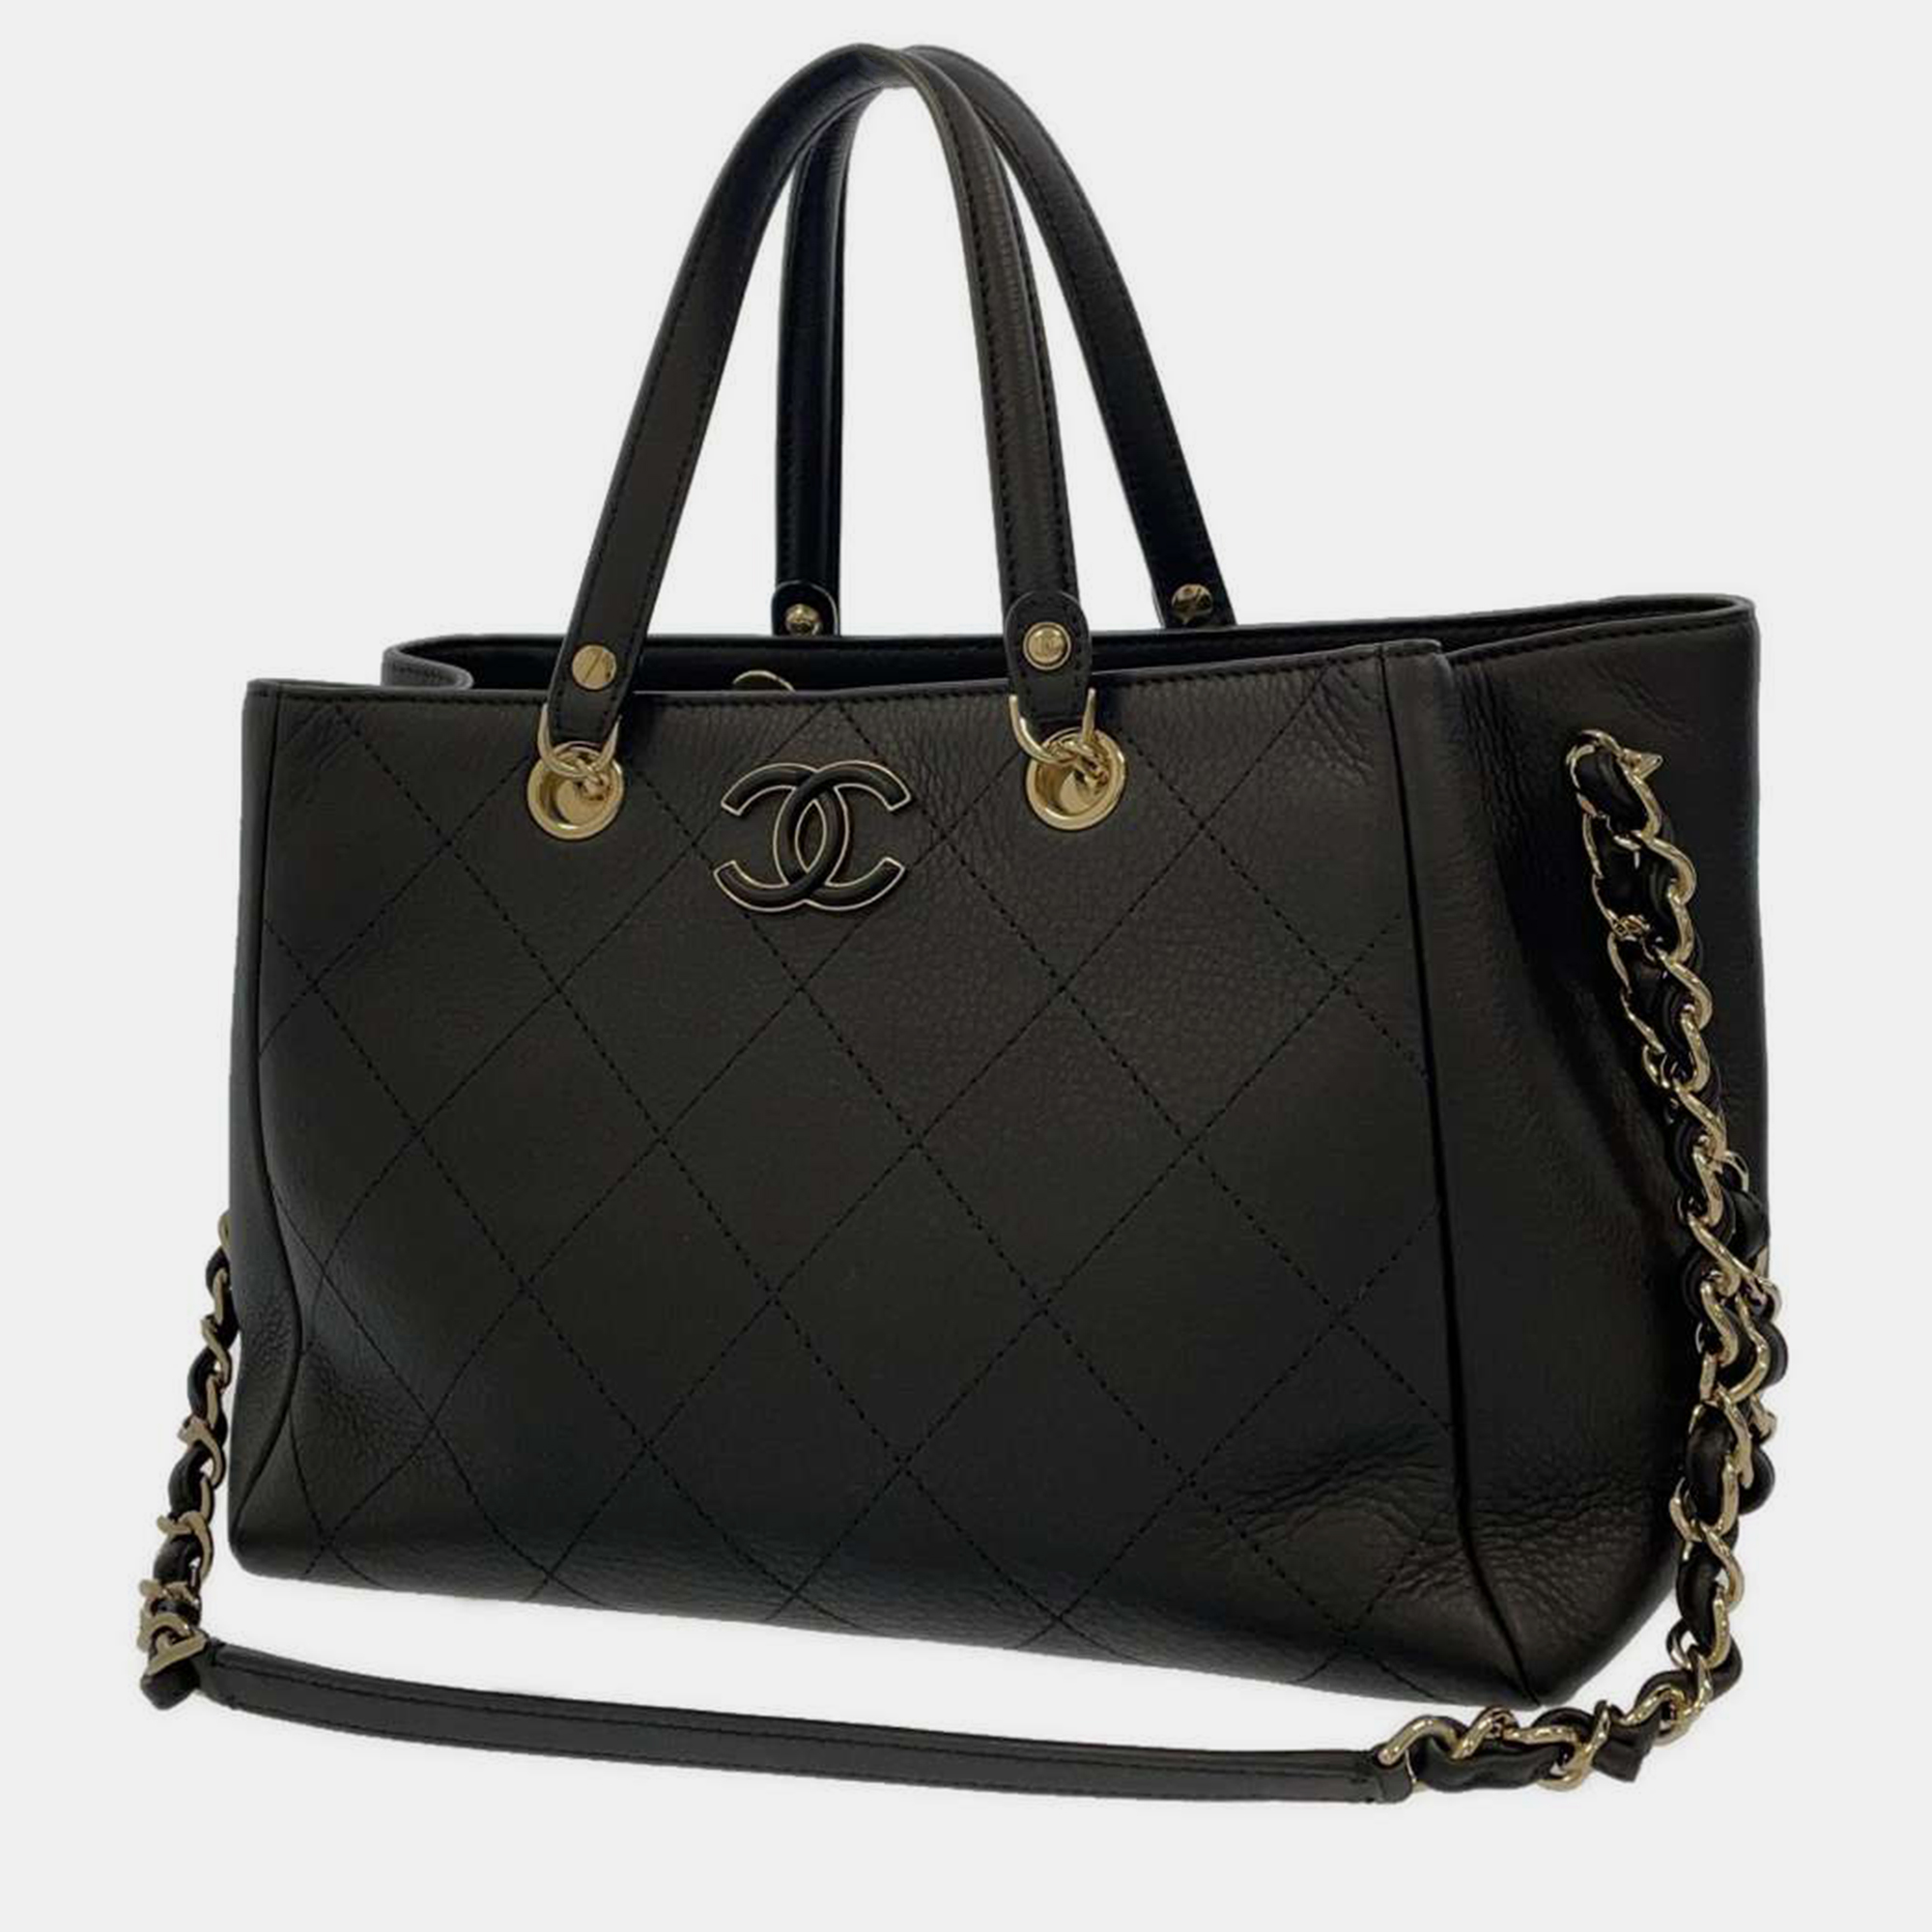 Chanel Black Leather Neo Soft Shopping Tote Bag